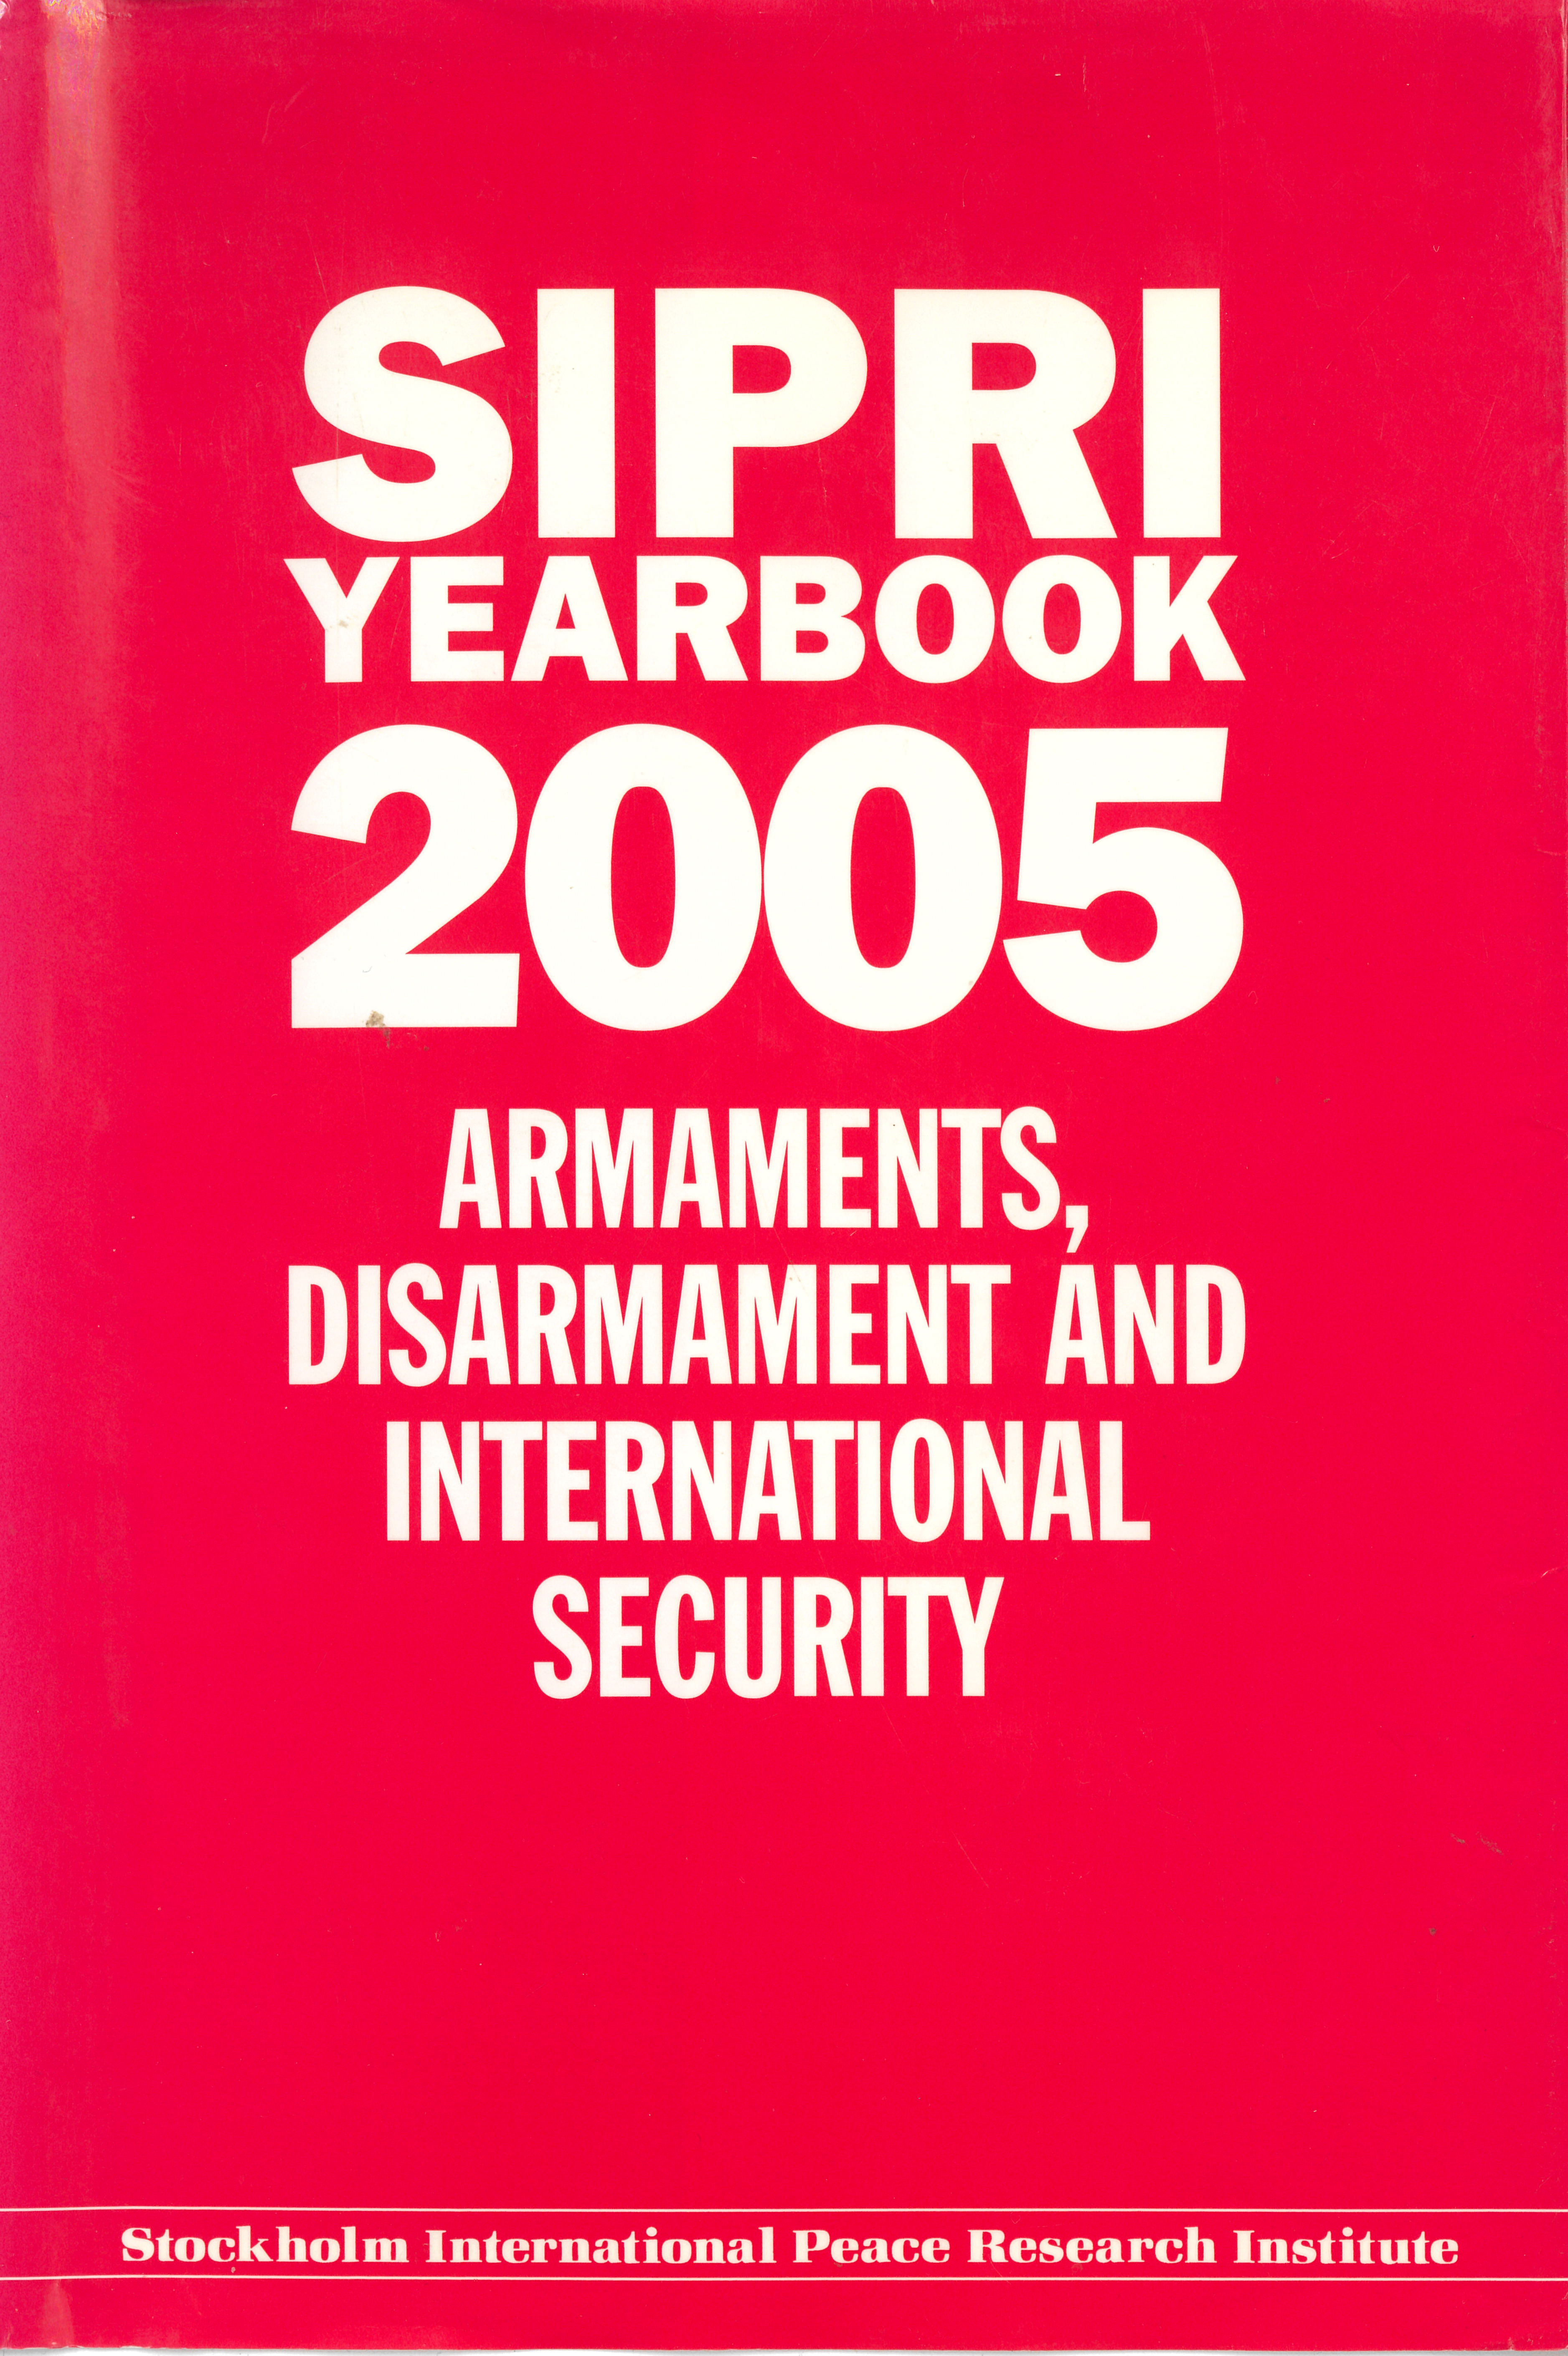 SIPRI yearbook 2005 cover